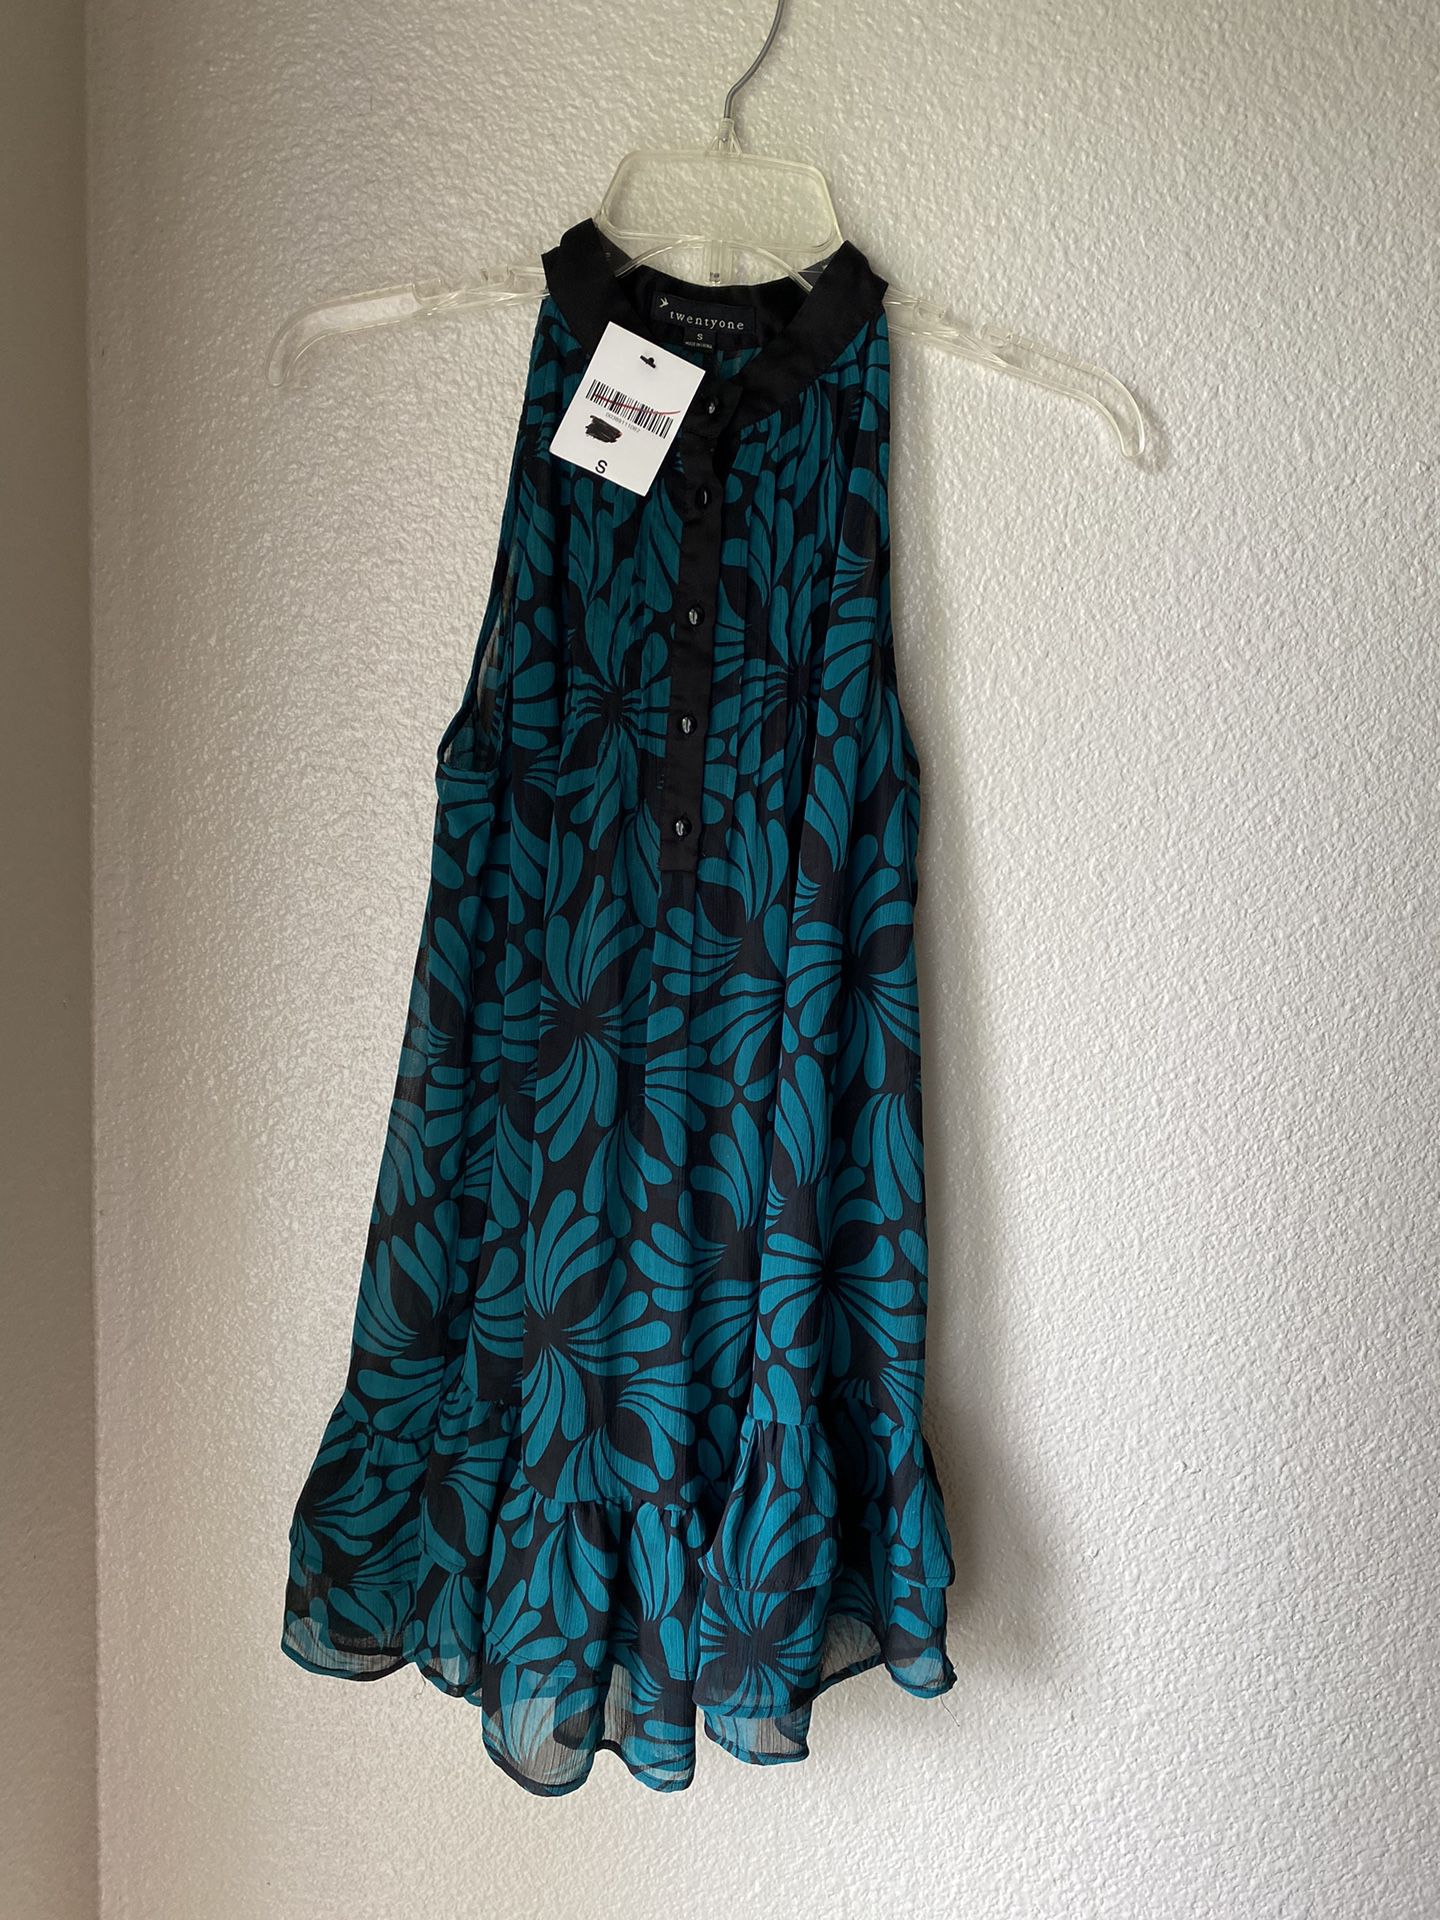 Brand New Woman’s Forever 21 brand Blue Dress Up For Sale 